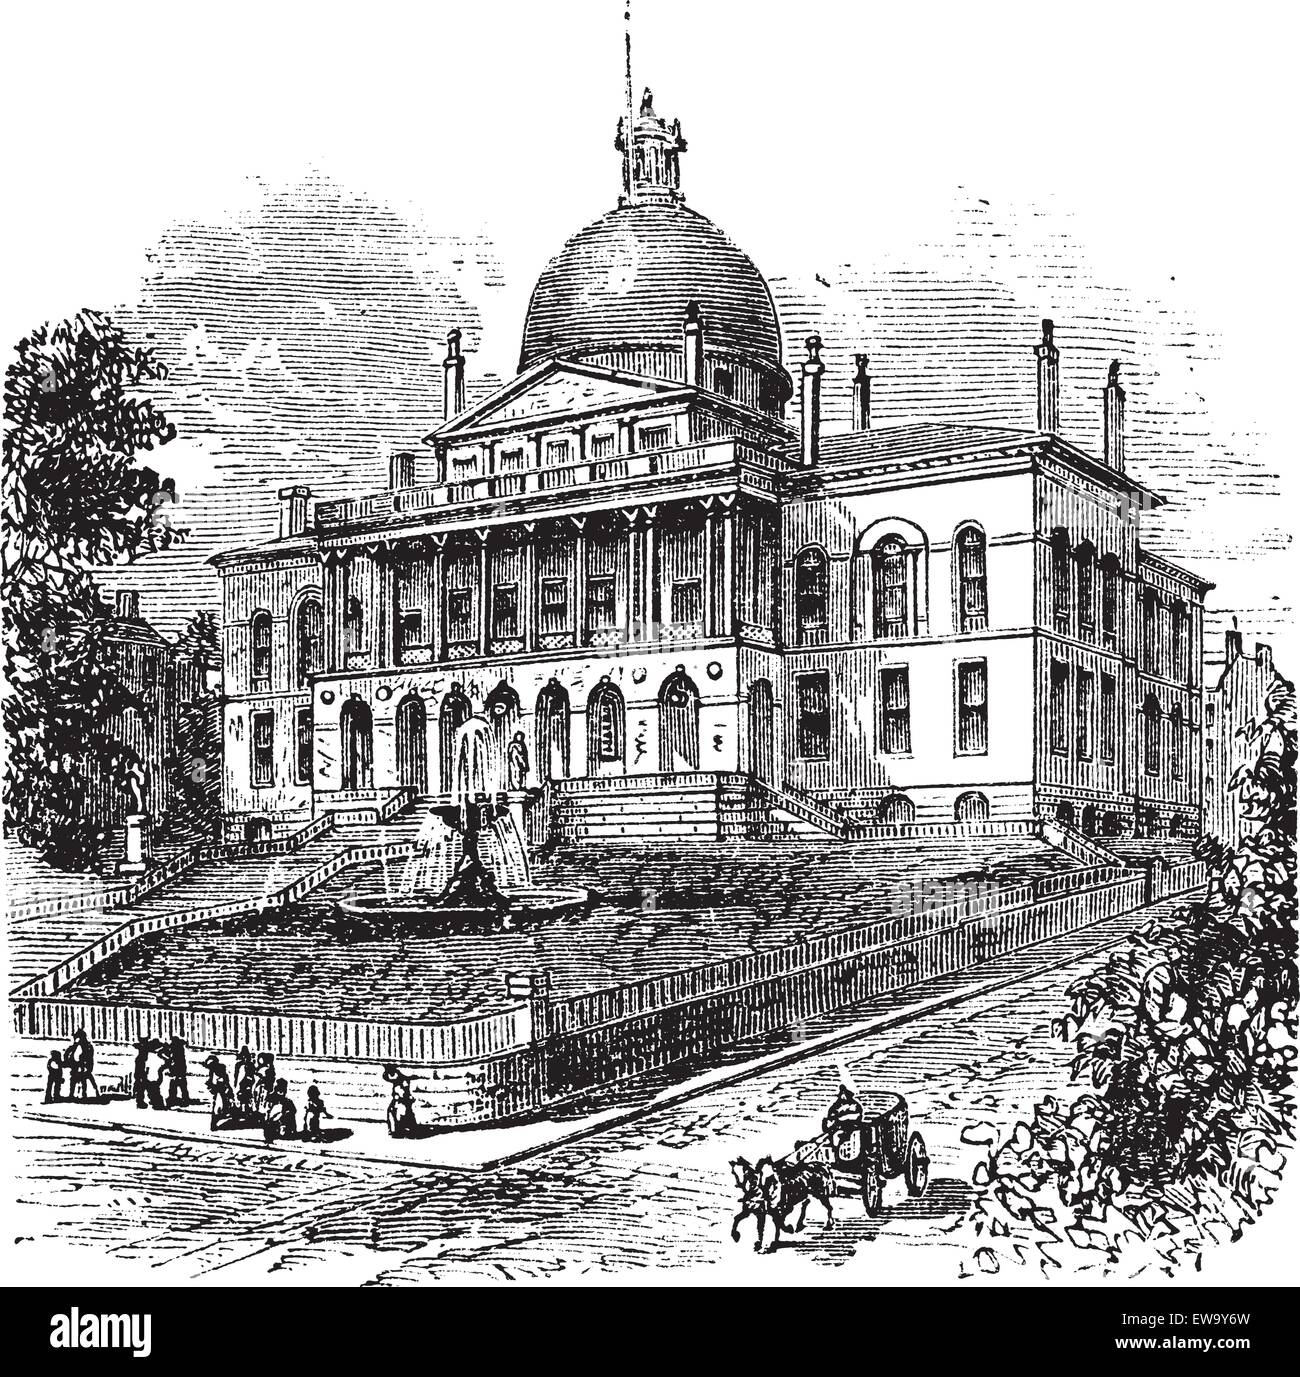 State House or Massachusetts State House or The New State House, Beacon Hill, Boston, Massachusetts, USA vintage engraving.  Old engraved illustration of building exterior Stock Vector